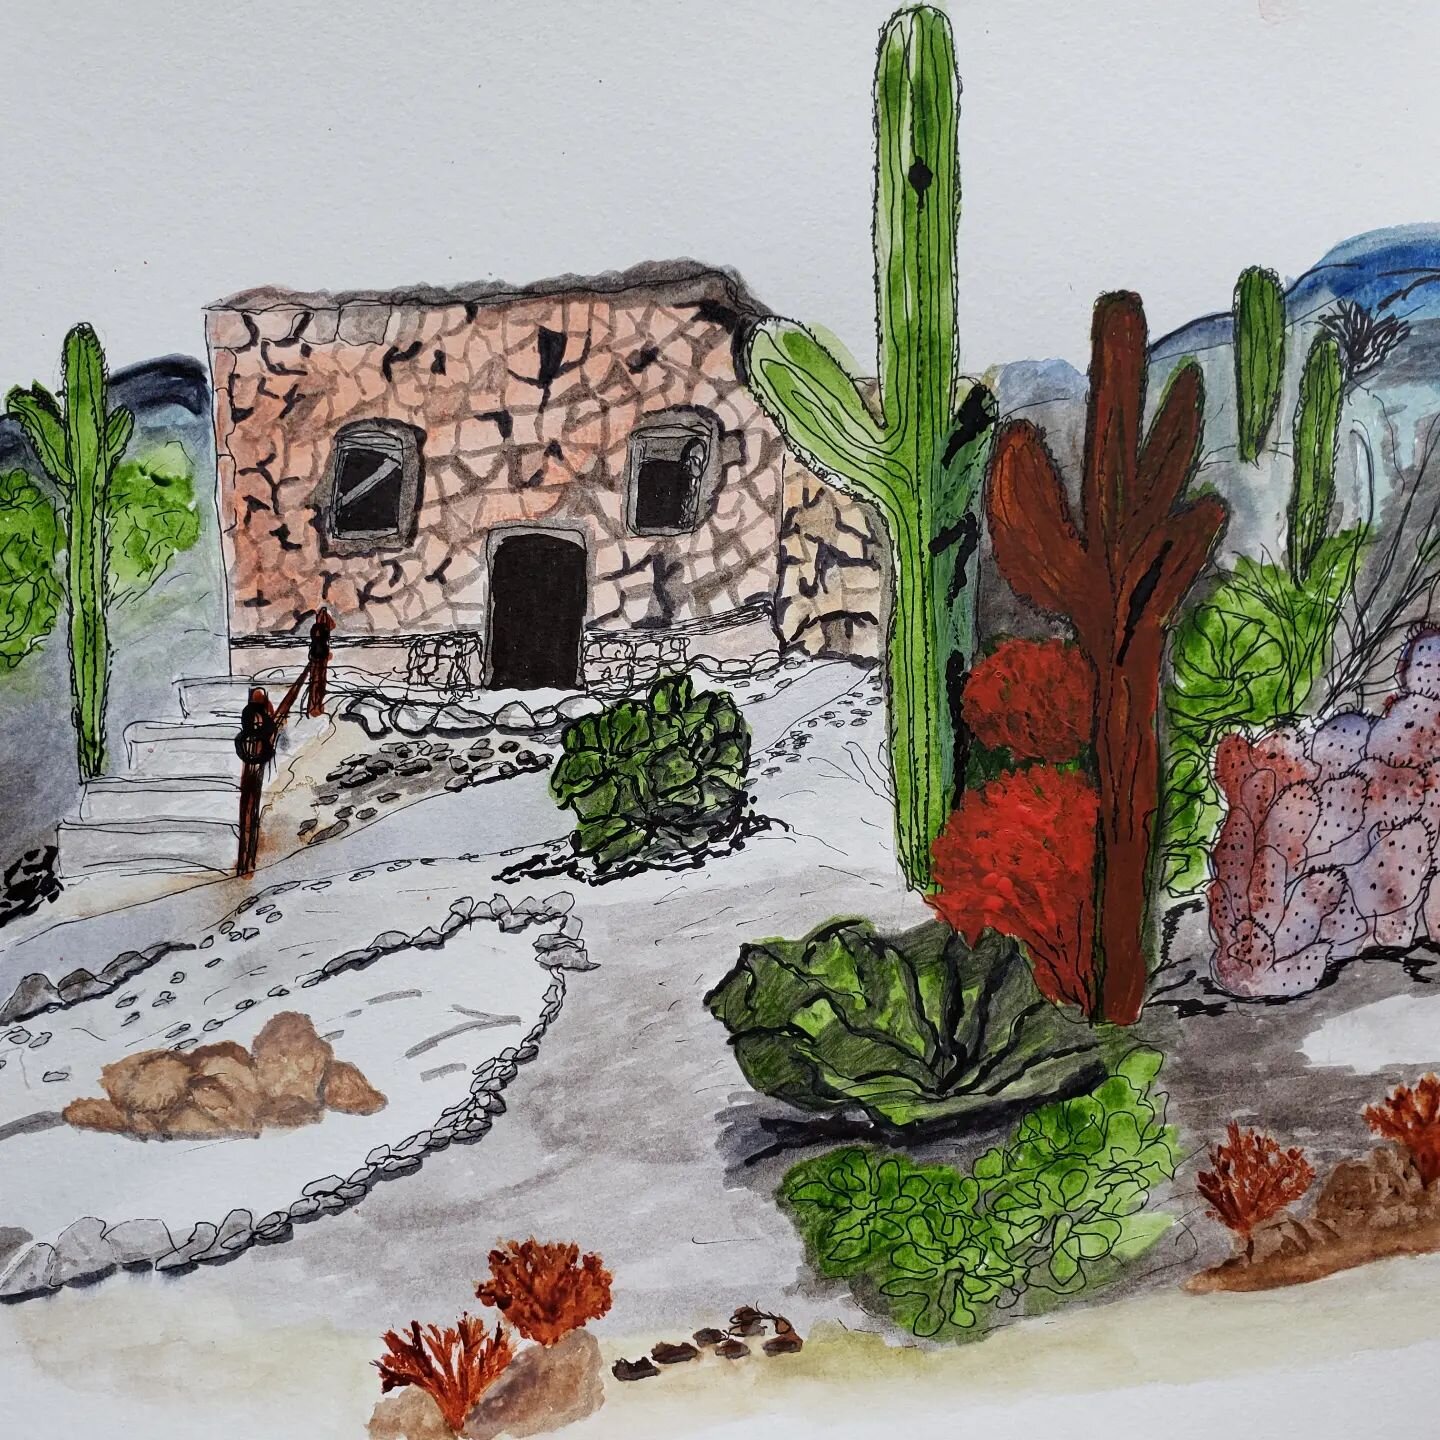 Just finished a week-long, watercolor-and-pen sketching class at Tucson's Tanque Verde Ranch.  All works had to be completed in 7 hours.  Loved the challenge.
#madelineislandschoolofthearts #thefinerartsgalleryaz #sonoranartsleague #azphotographyalli